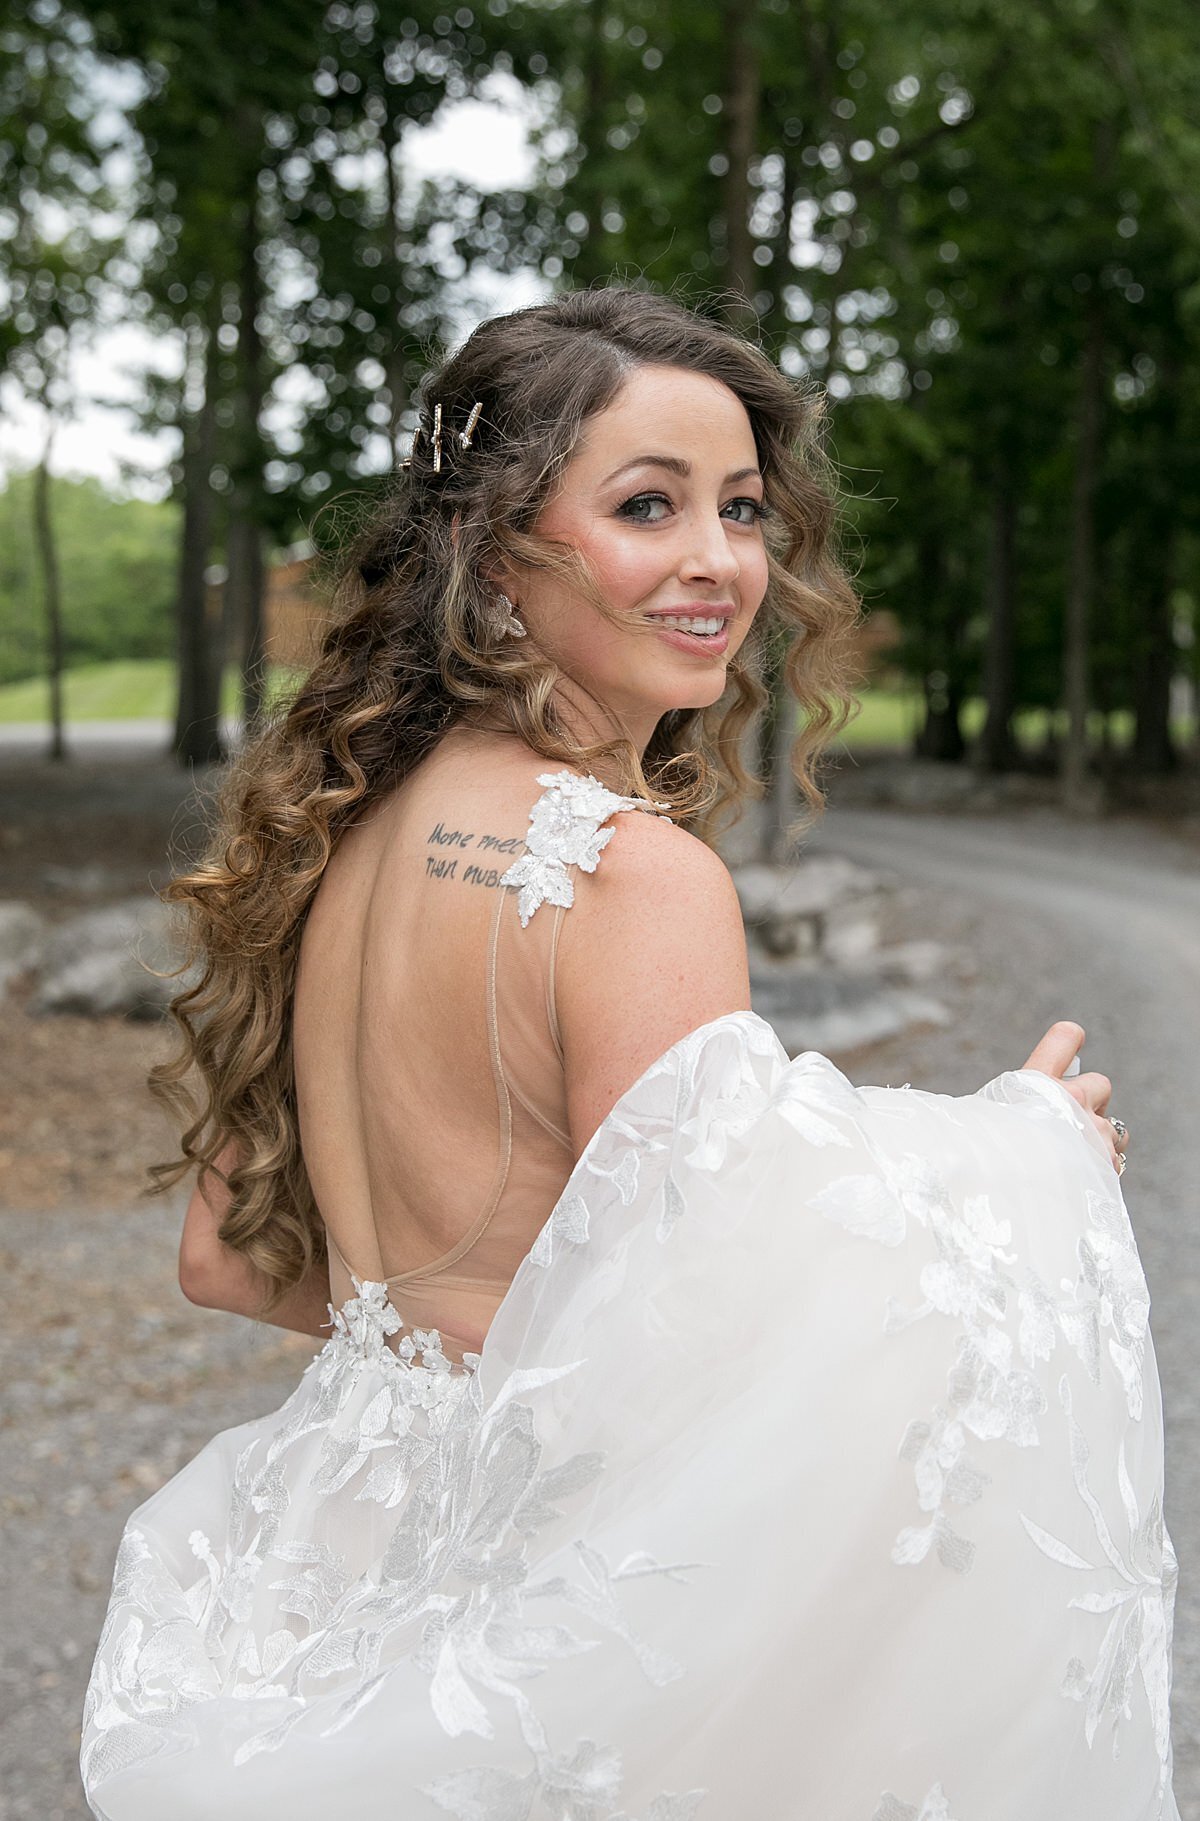 Bride in a backless lace wedding dress walks down the wooded pathway at Saddle Woods Farm.